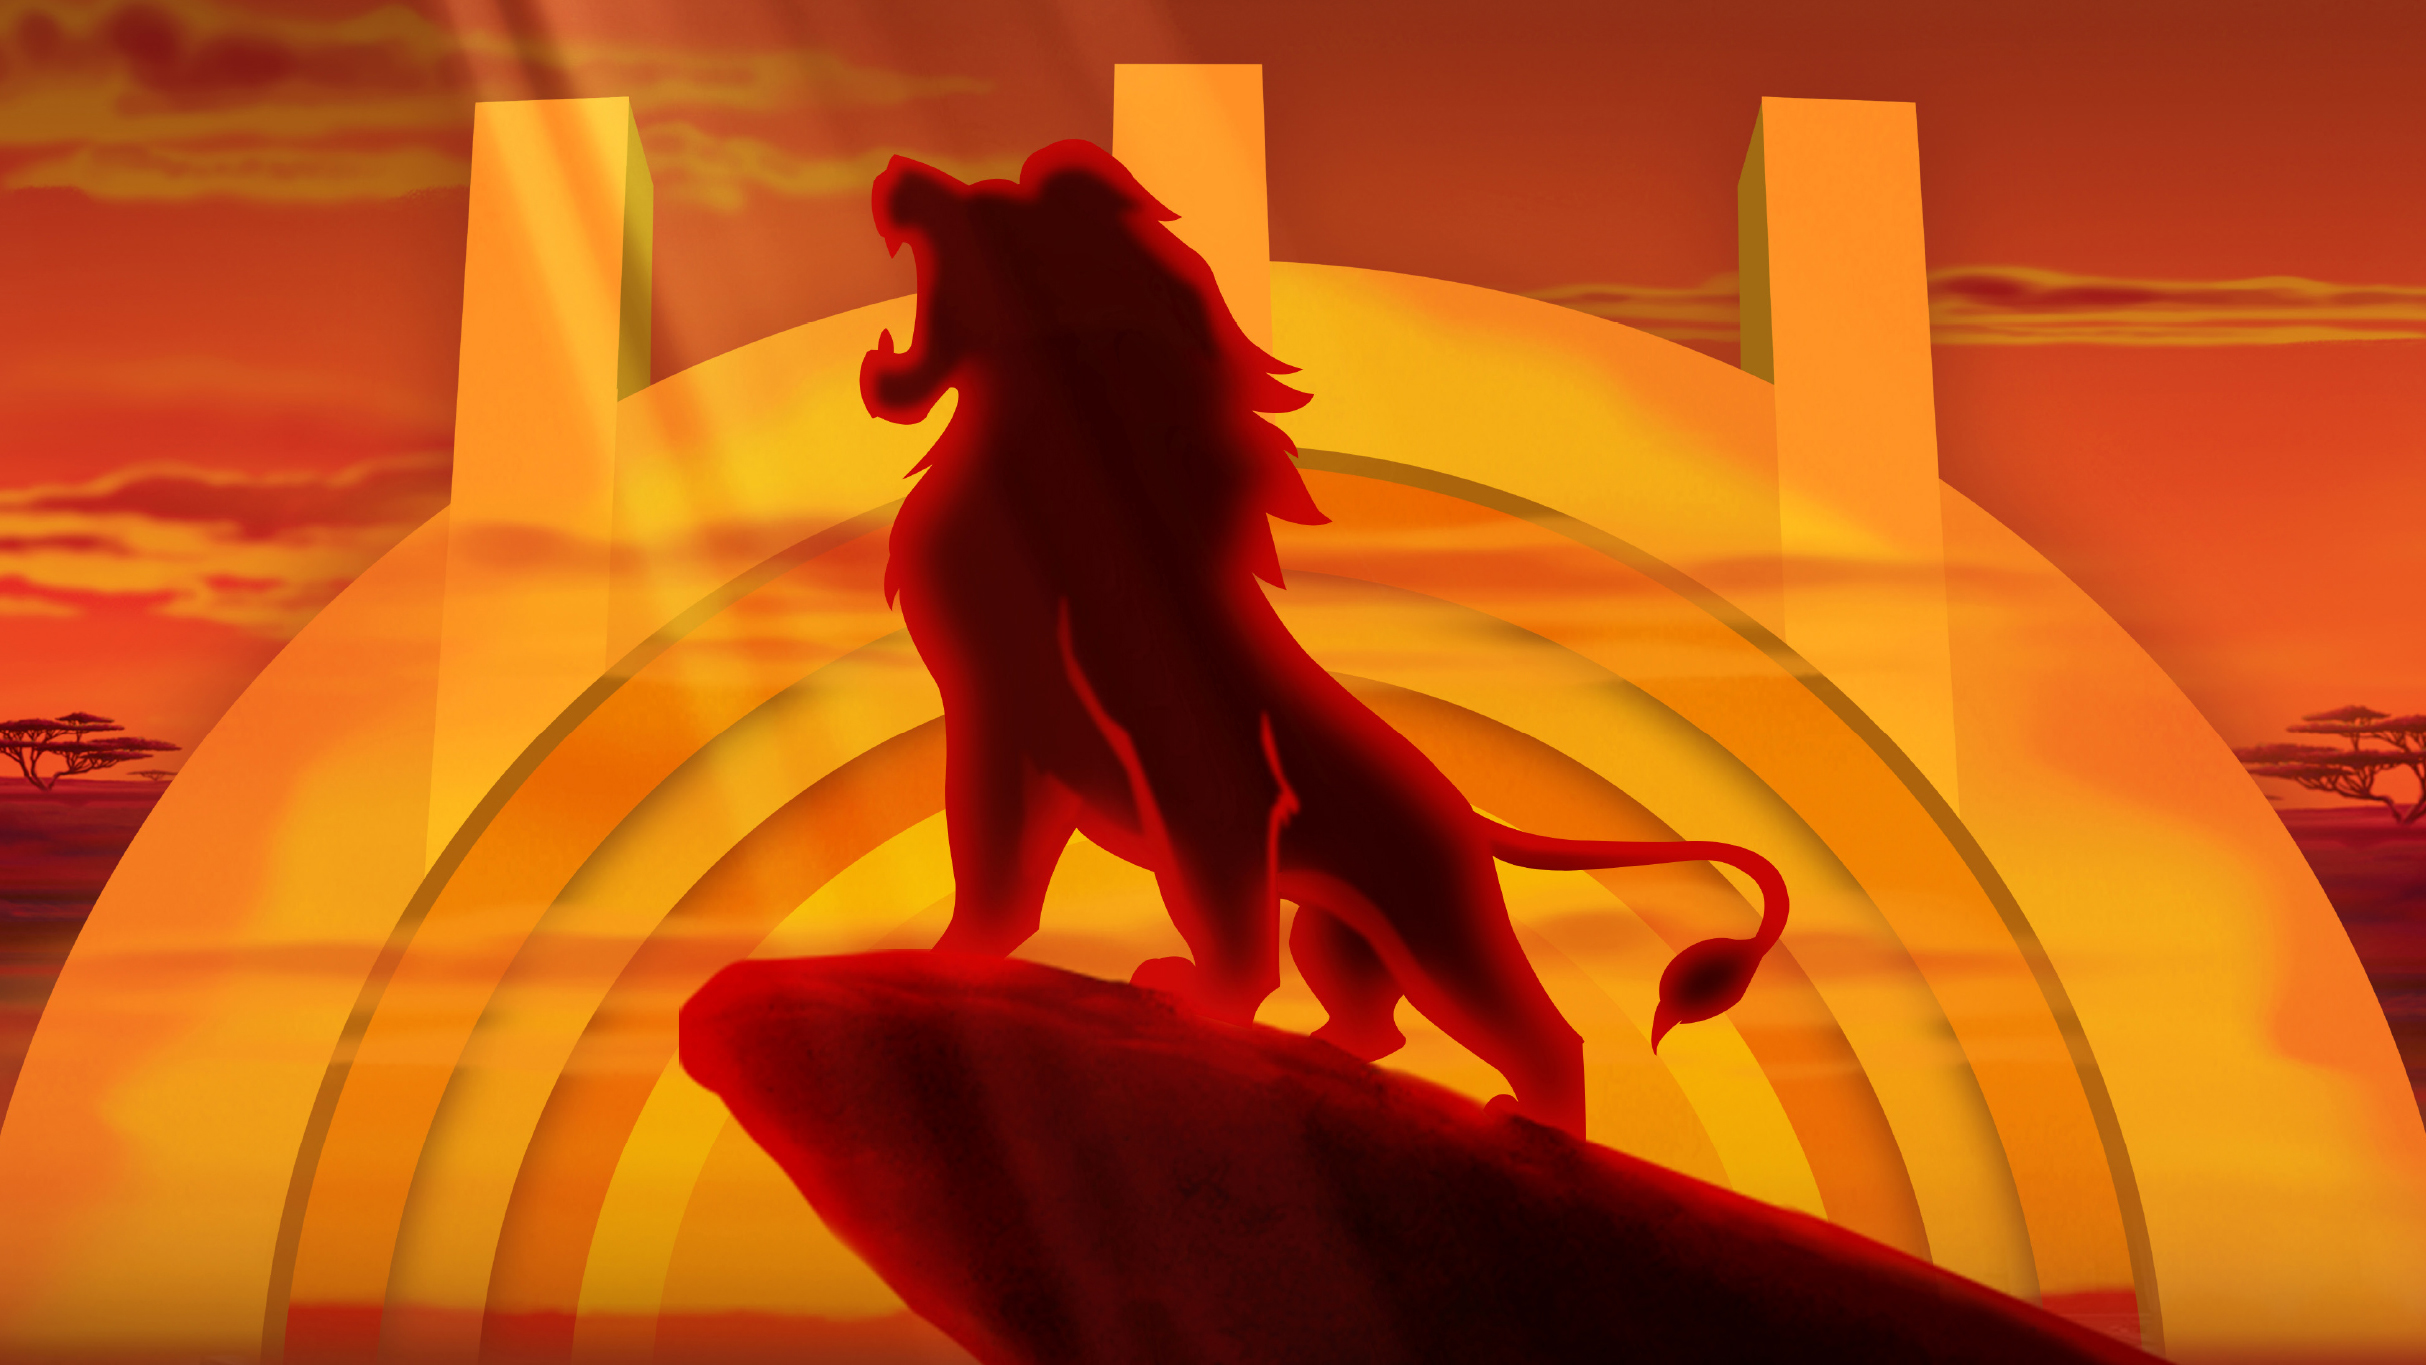 DISNEY'S THE LION KING 30th ANNIVERSARY: LIVE-TO-FILM CONCERT EVENT